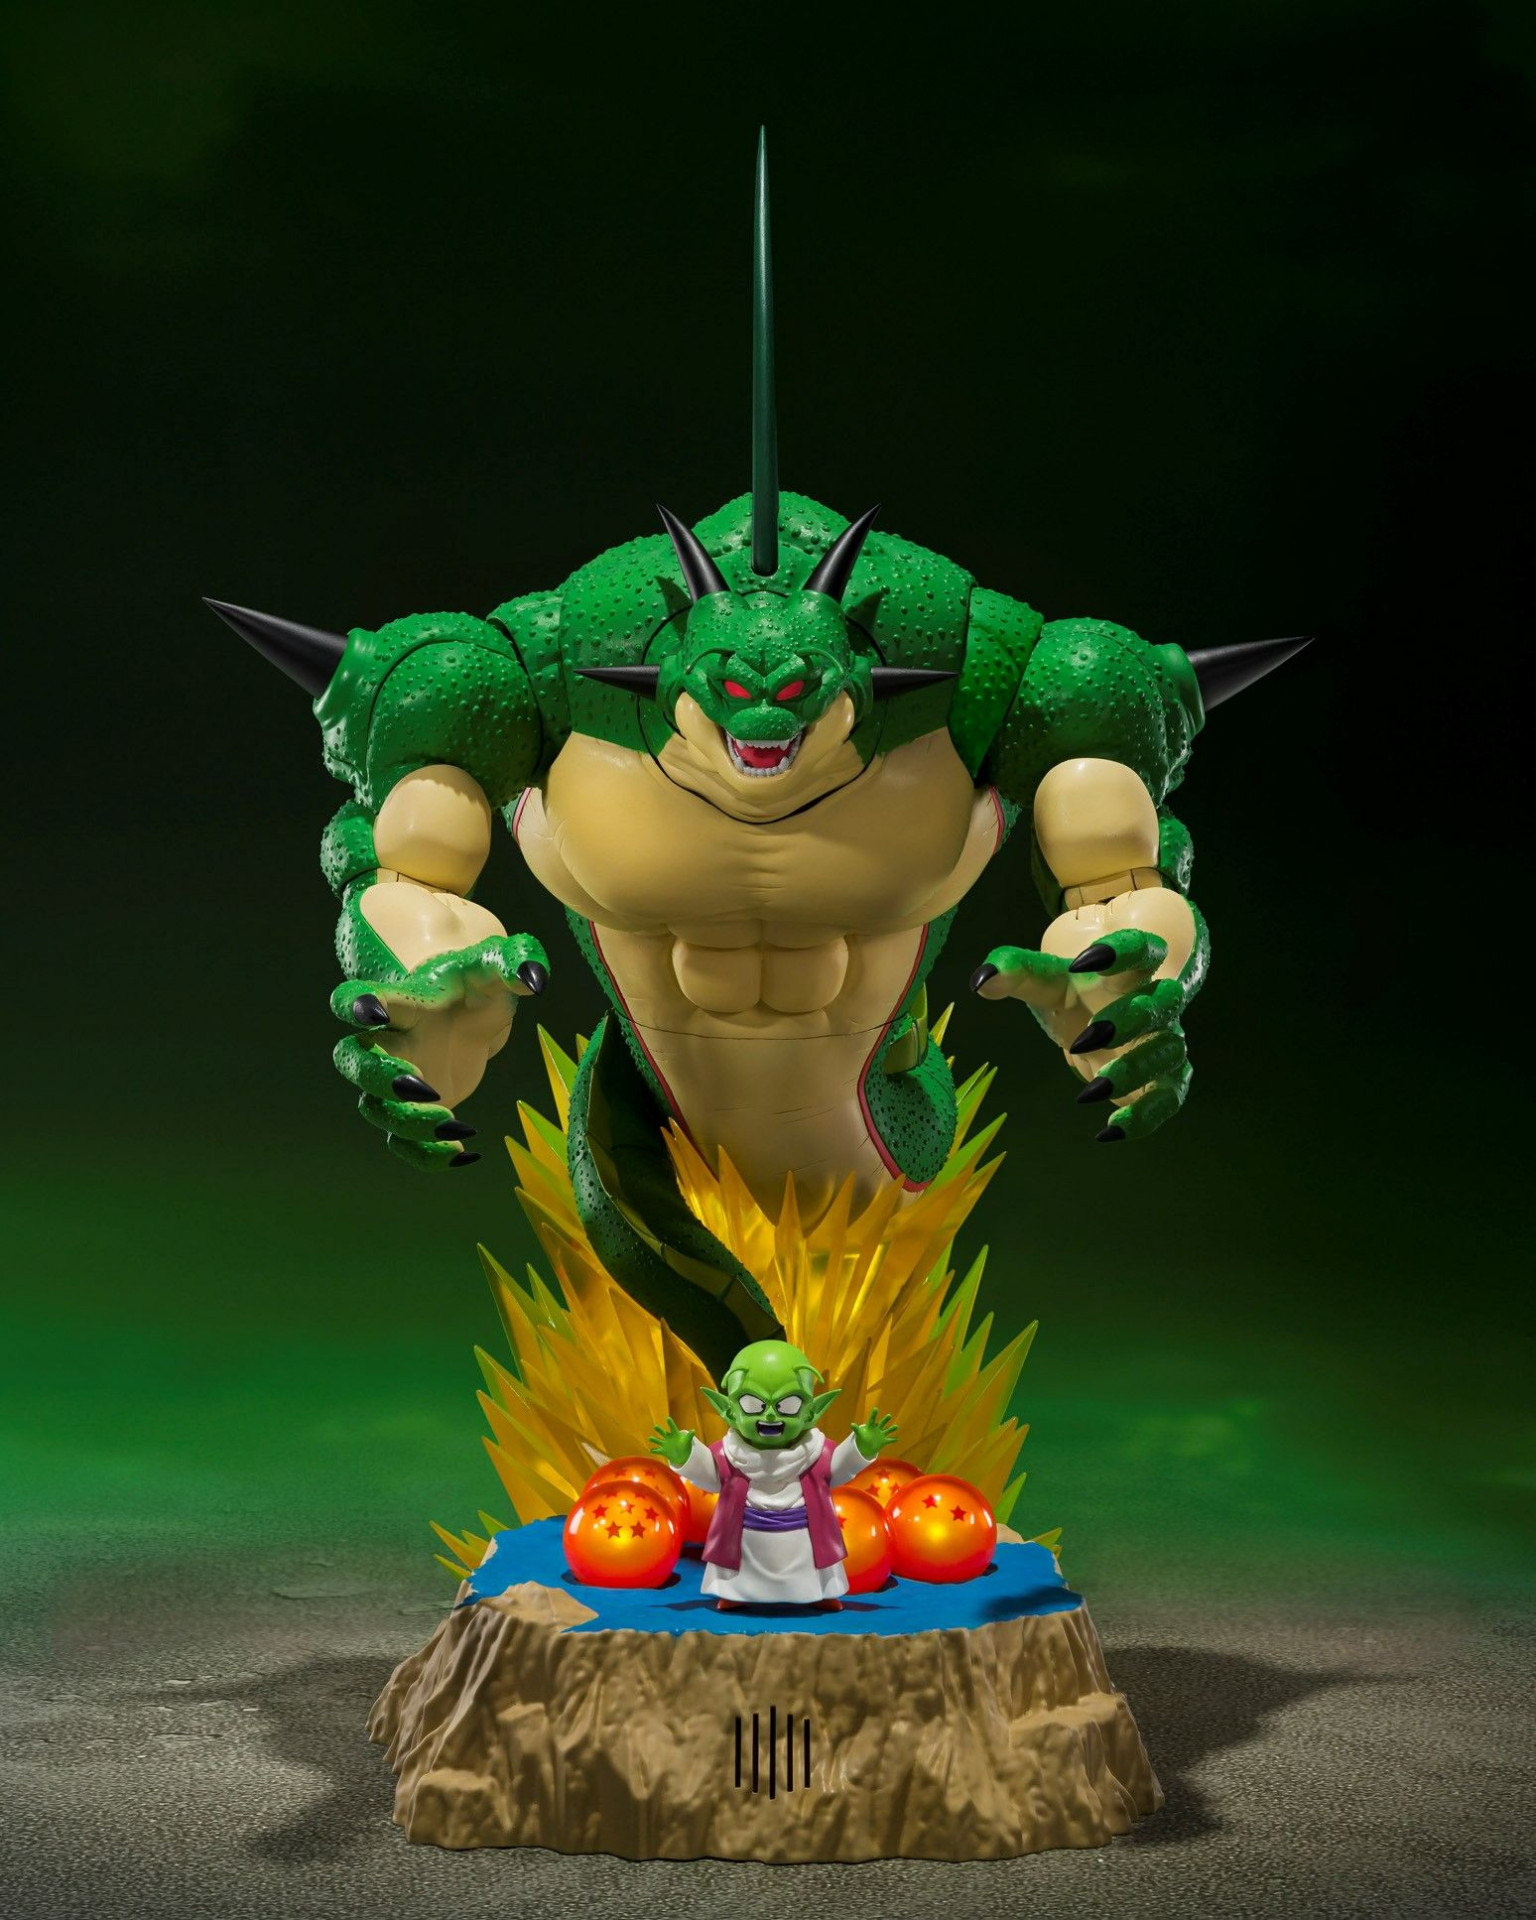 Porunga & Dende Is Coming to the S.H.Figuarts Series!